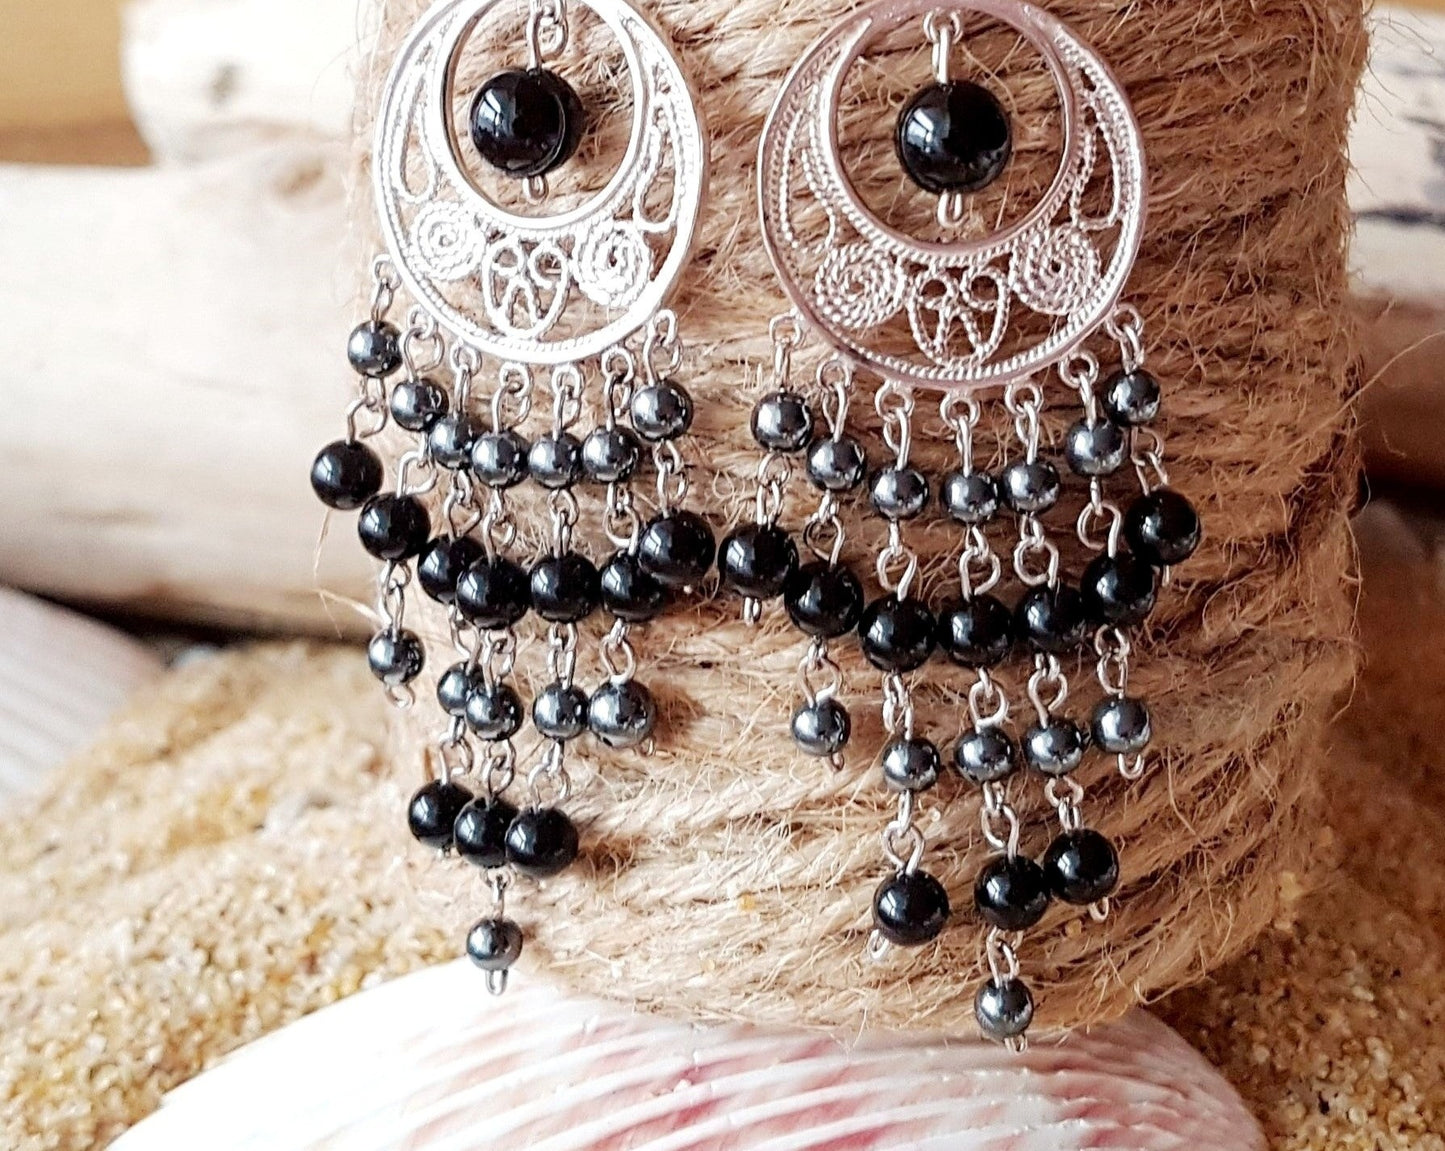 Long Decorative Black Onyx Hematite Chandelier Earrings with Filigree Sterling Silver design and long dangling streams of small round black onyx and hematite beads